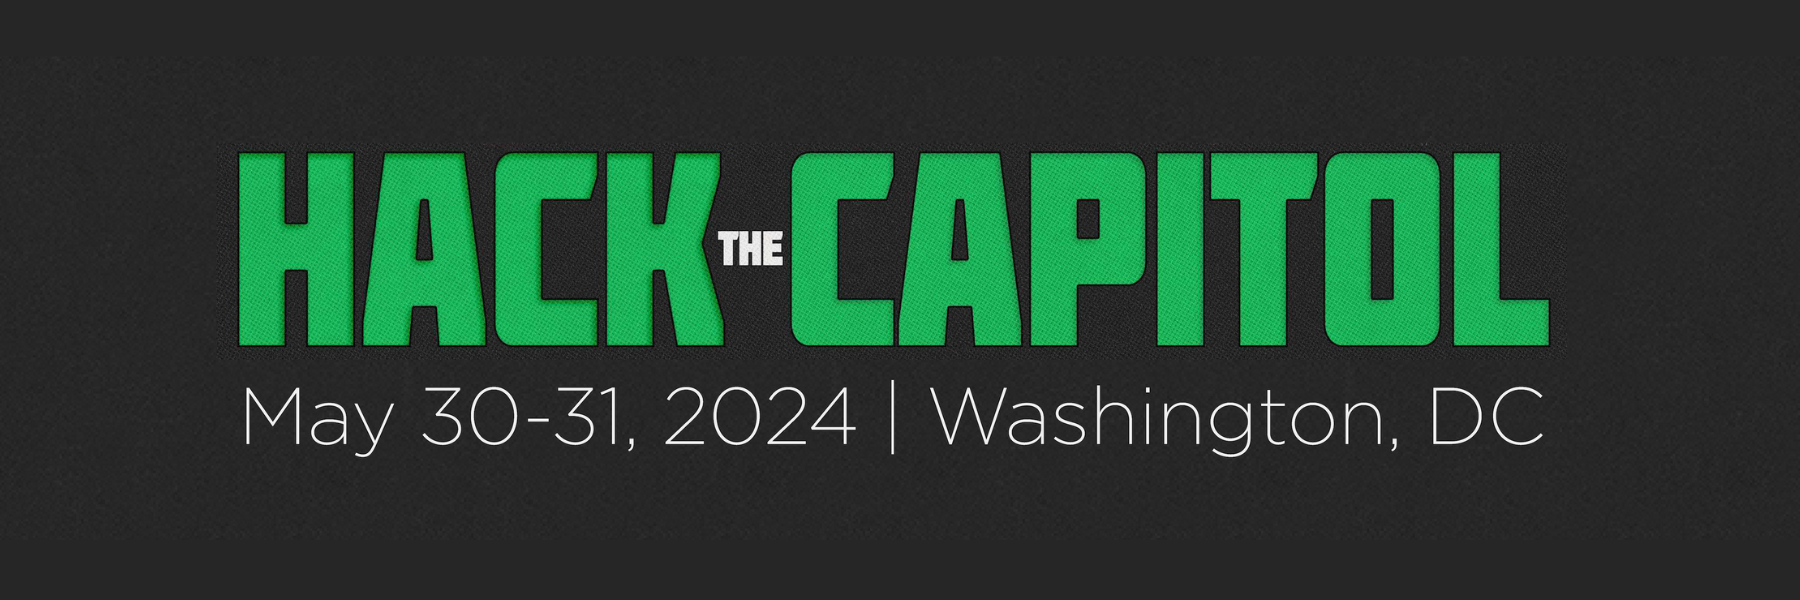 Hack the Capitol 7.0